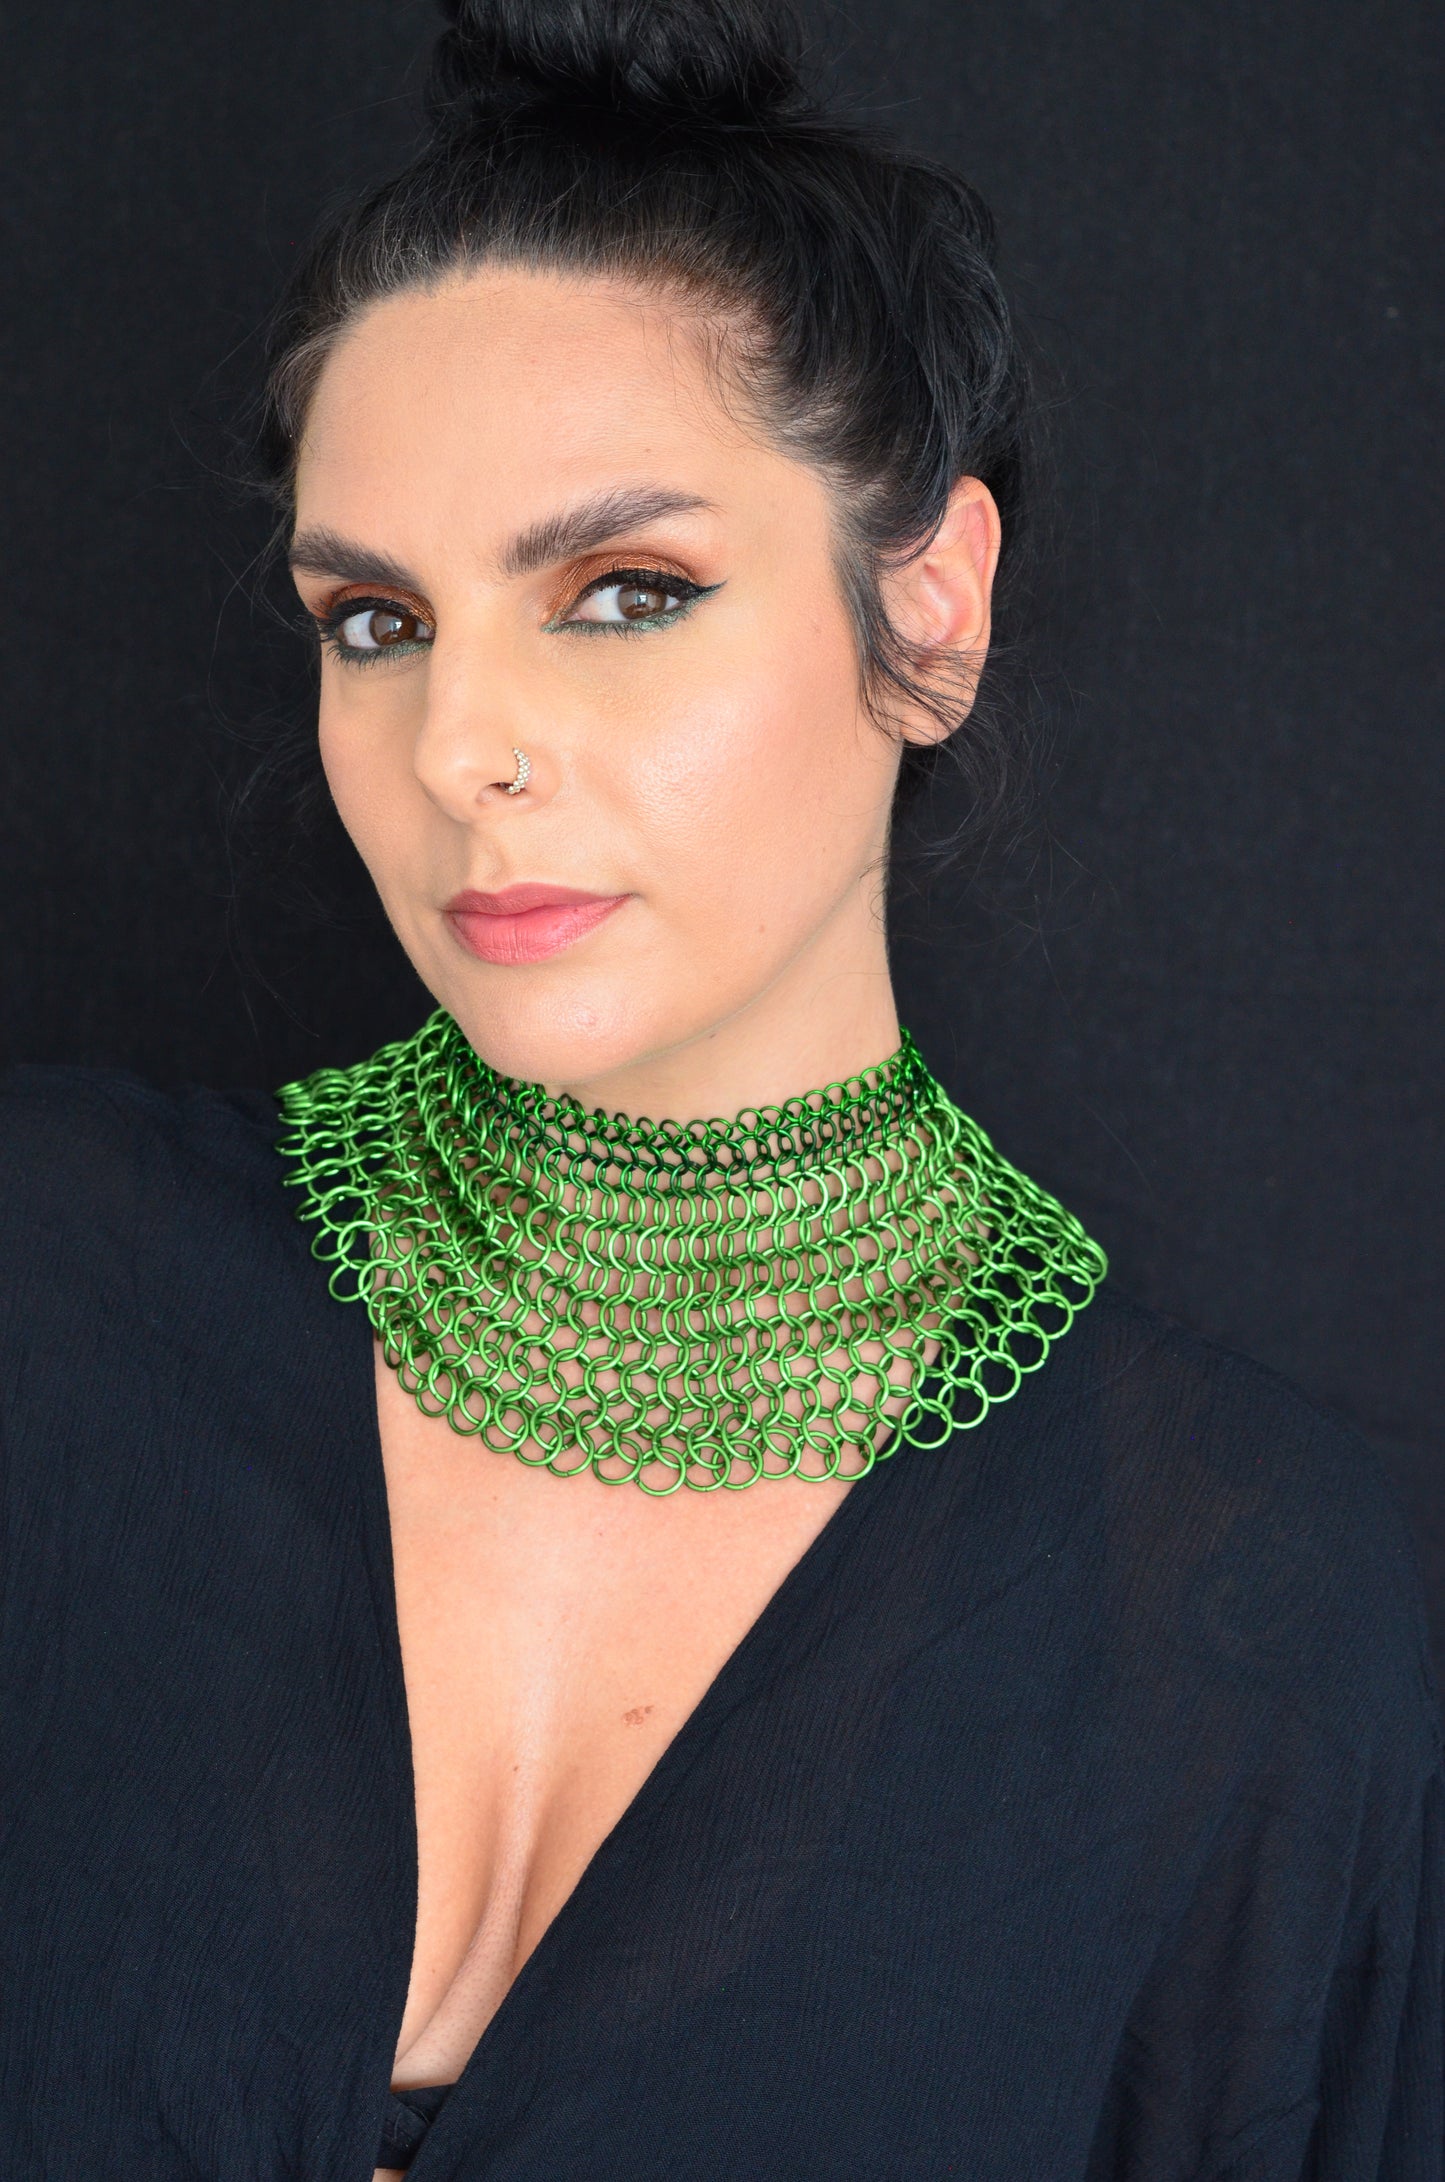 Metallic Green Chainmaille Cleopatra Collar